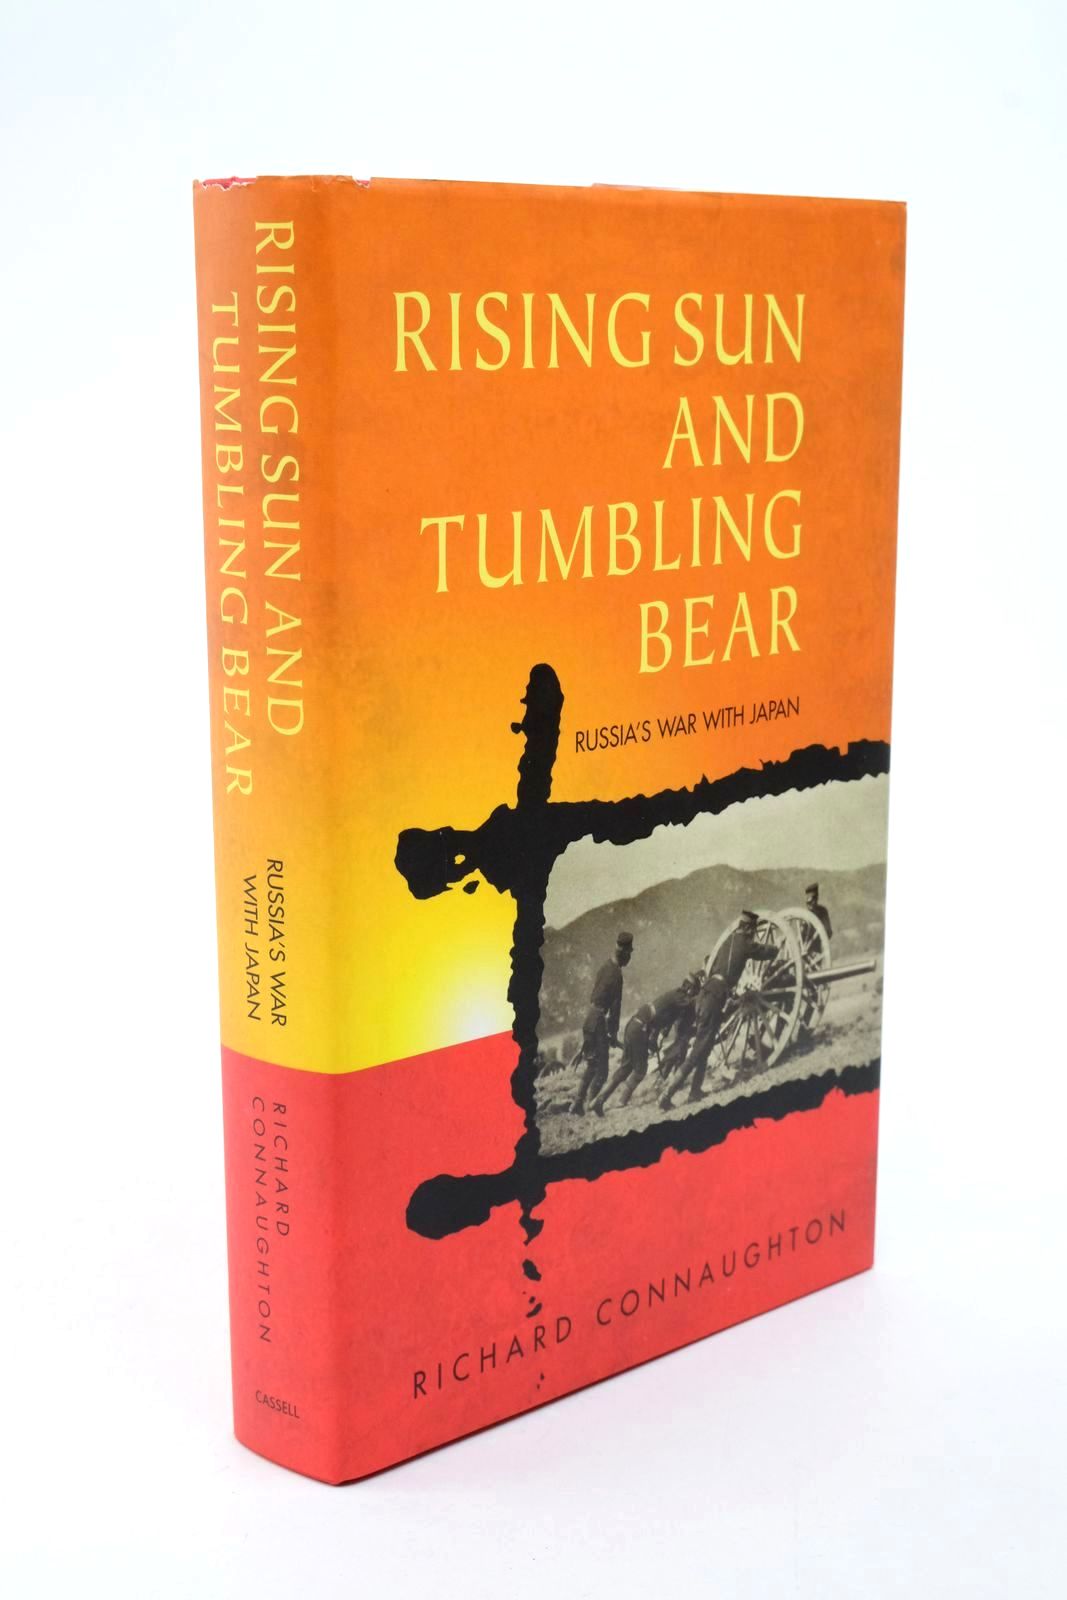 Photo of RISING SUN AND TUMBLING BEAR - RUSSIA'S WAR WITH JAPAN written by Connaughton, Richard published by Cassell (STOCK CODE: 1322602)  for sale by Stella & Rose's Books